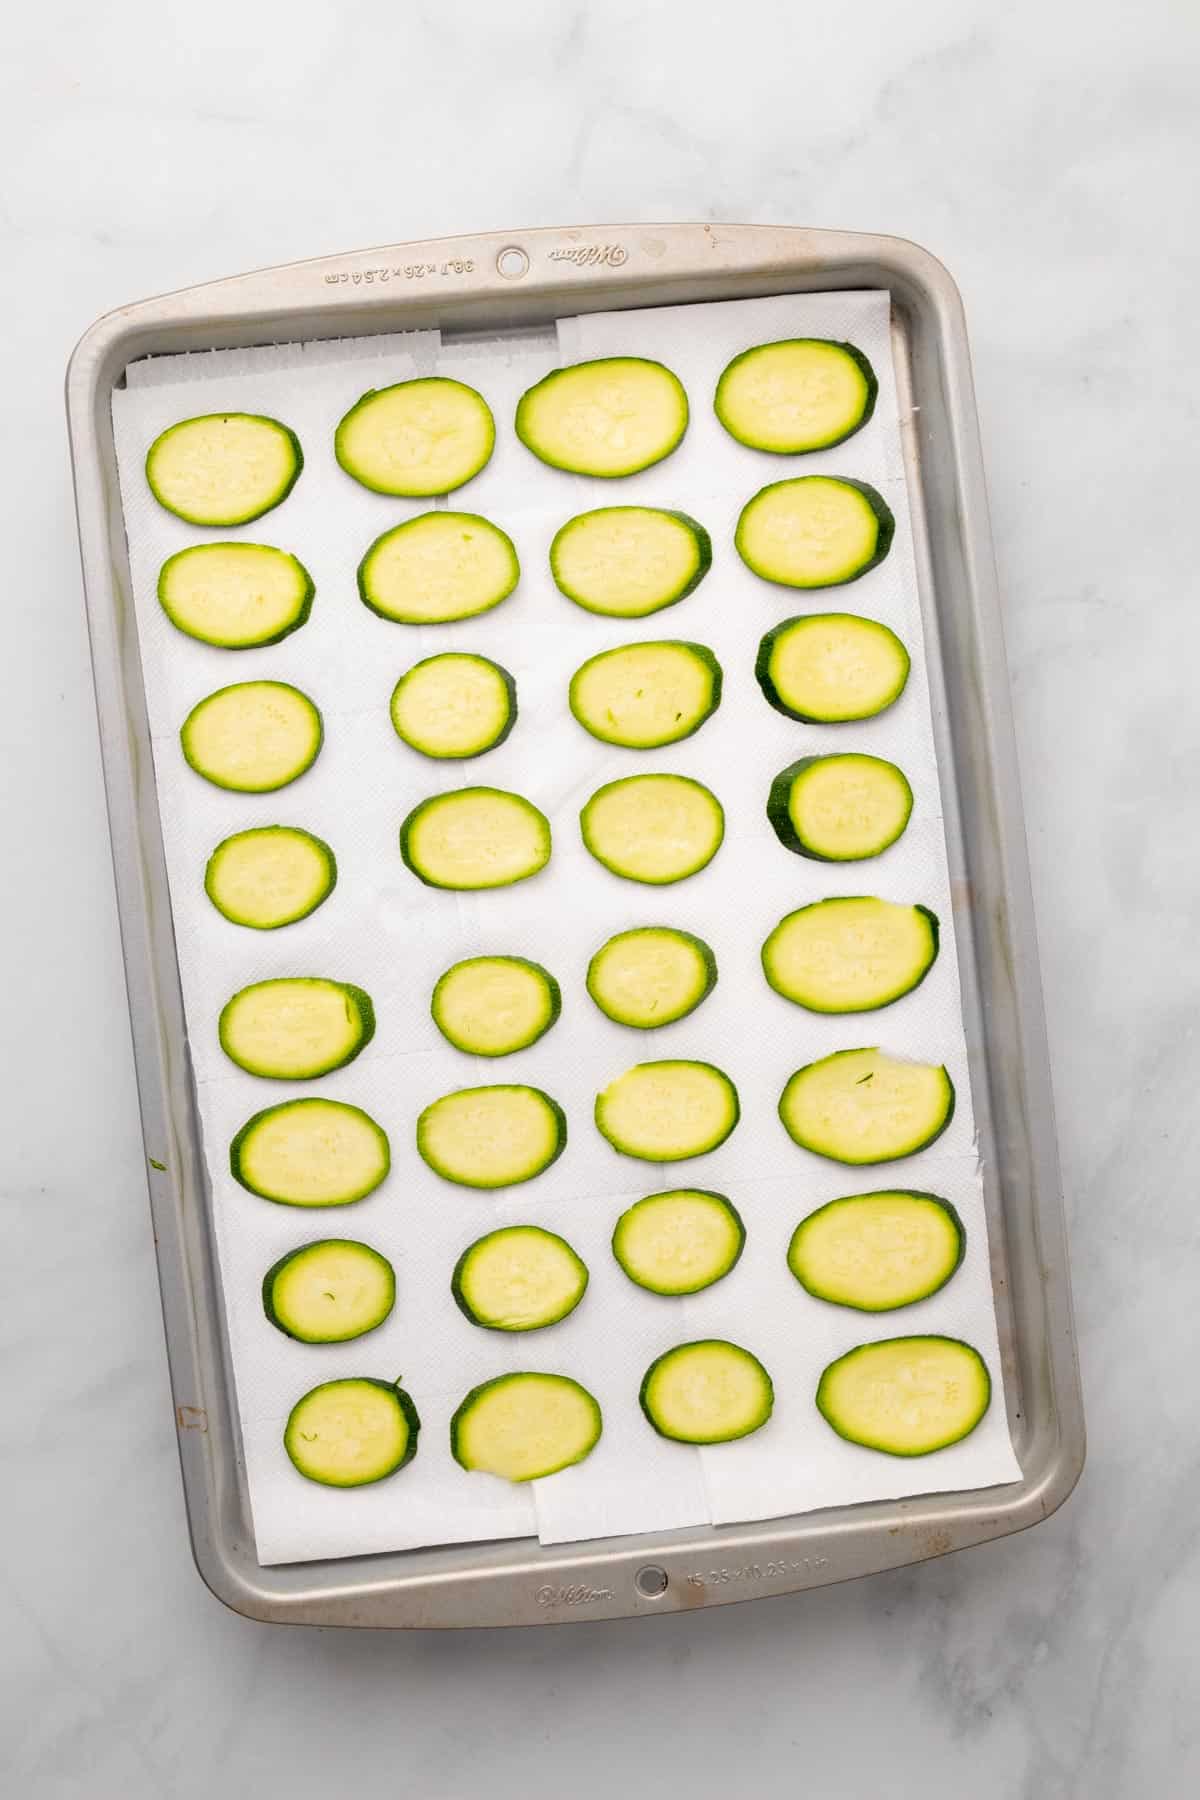 Salted zucchini slices on paper towels